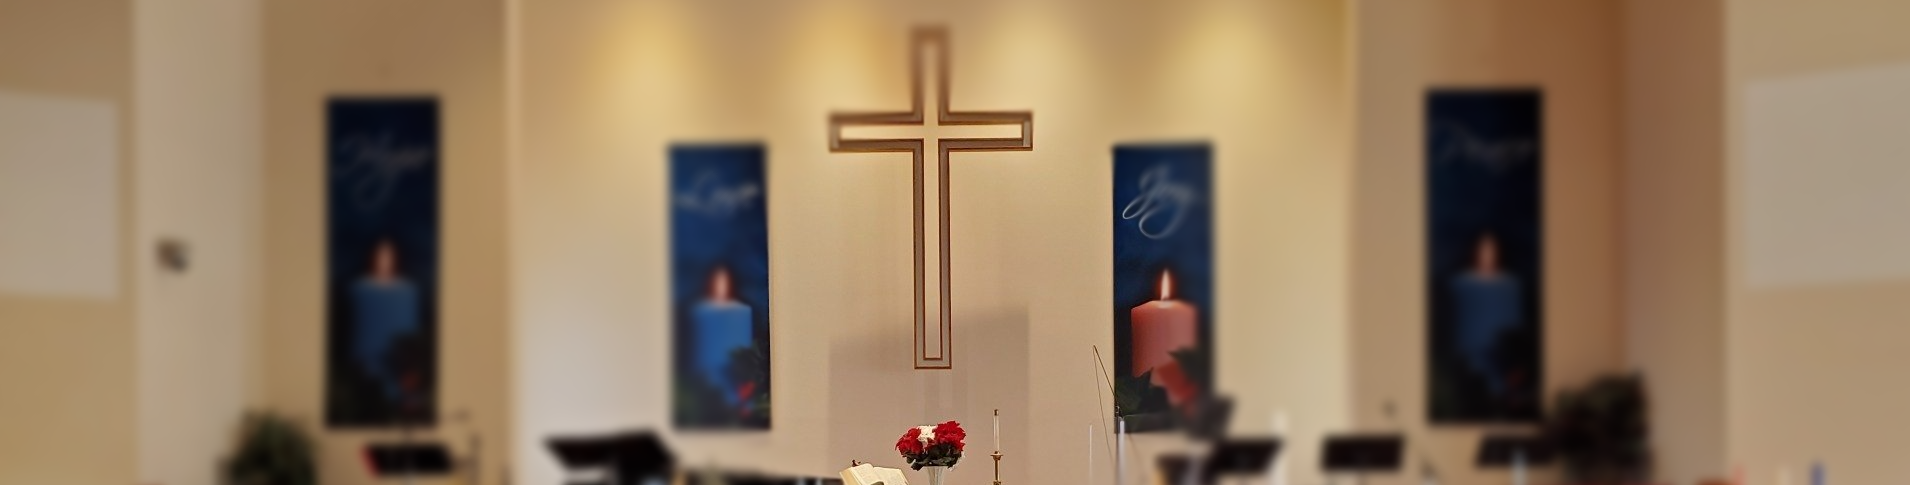 Great Room platform with cross on wall and banners showing candles.